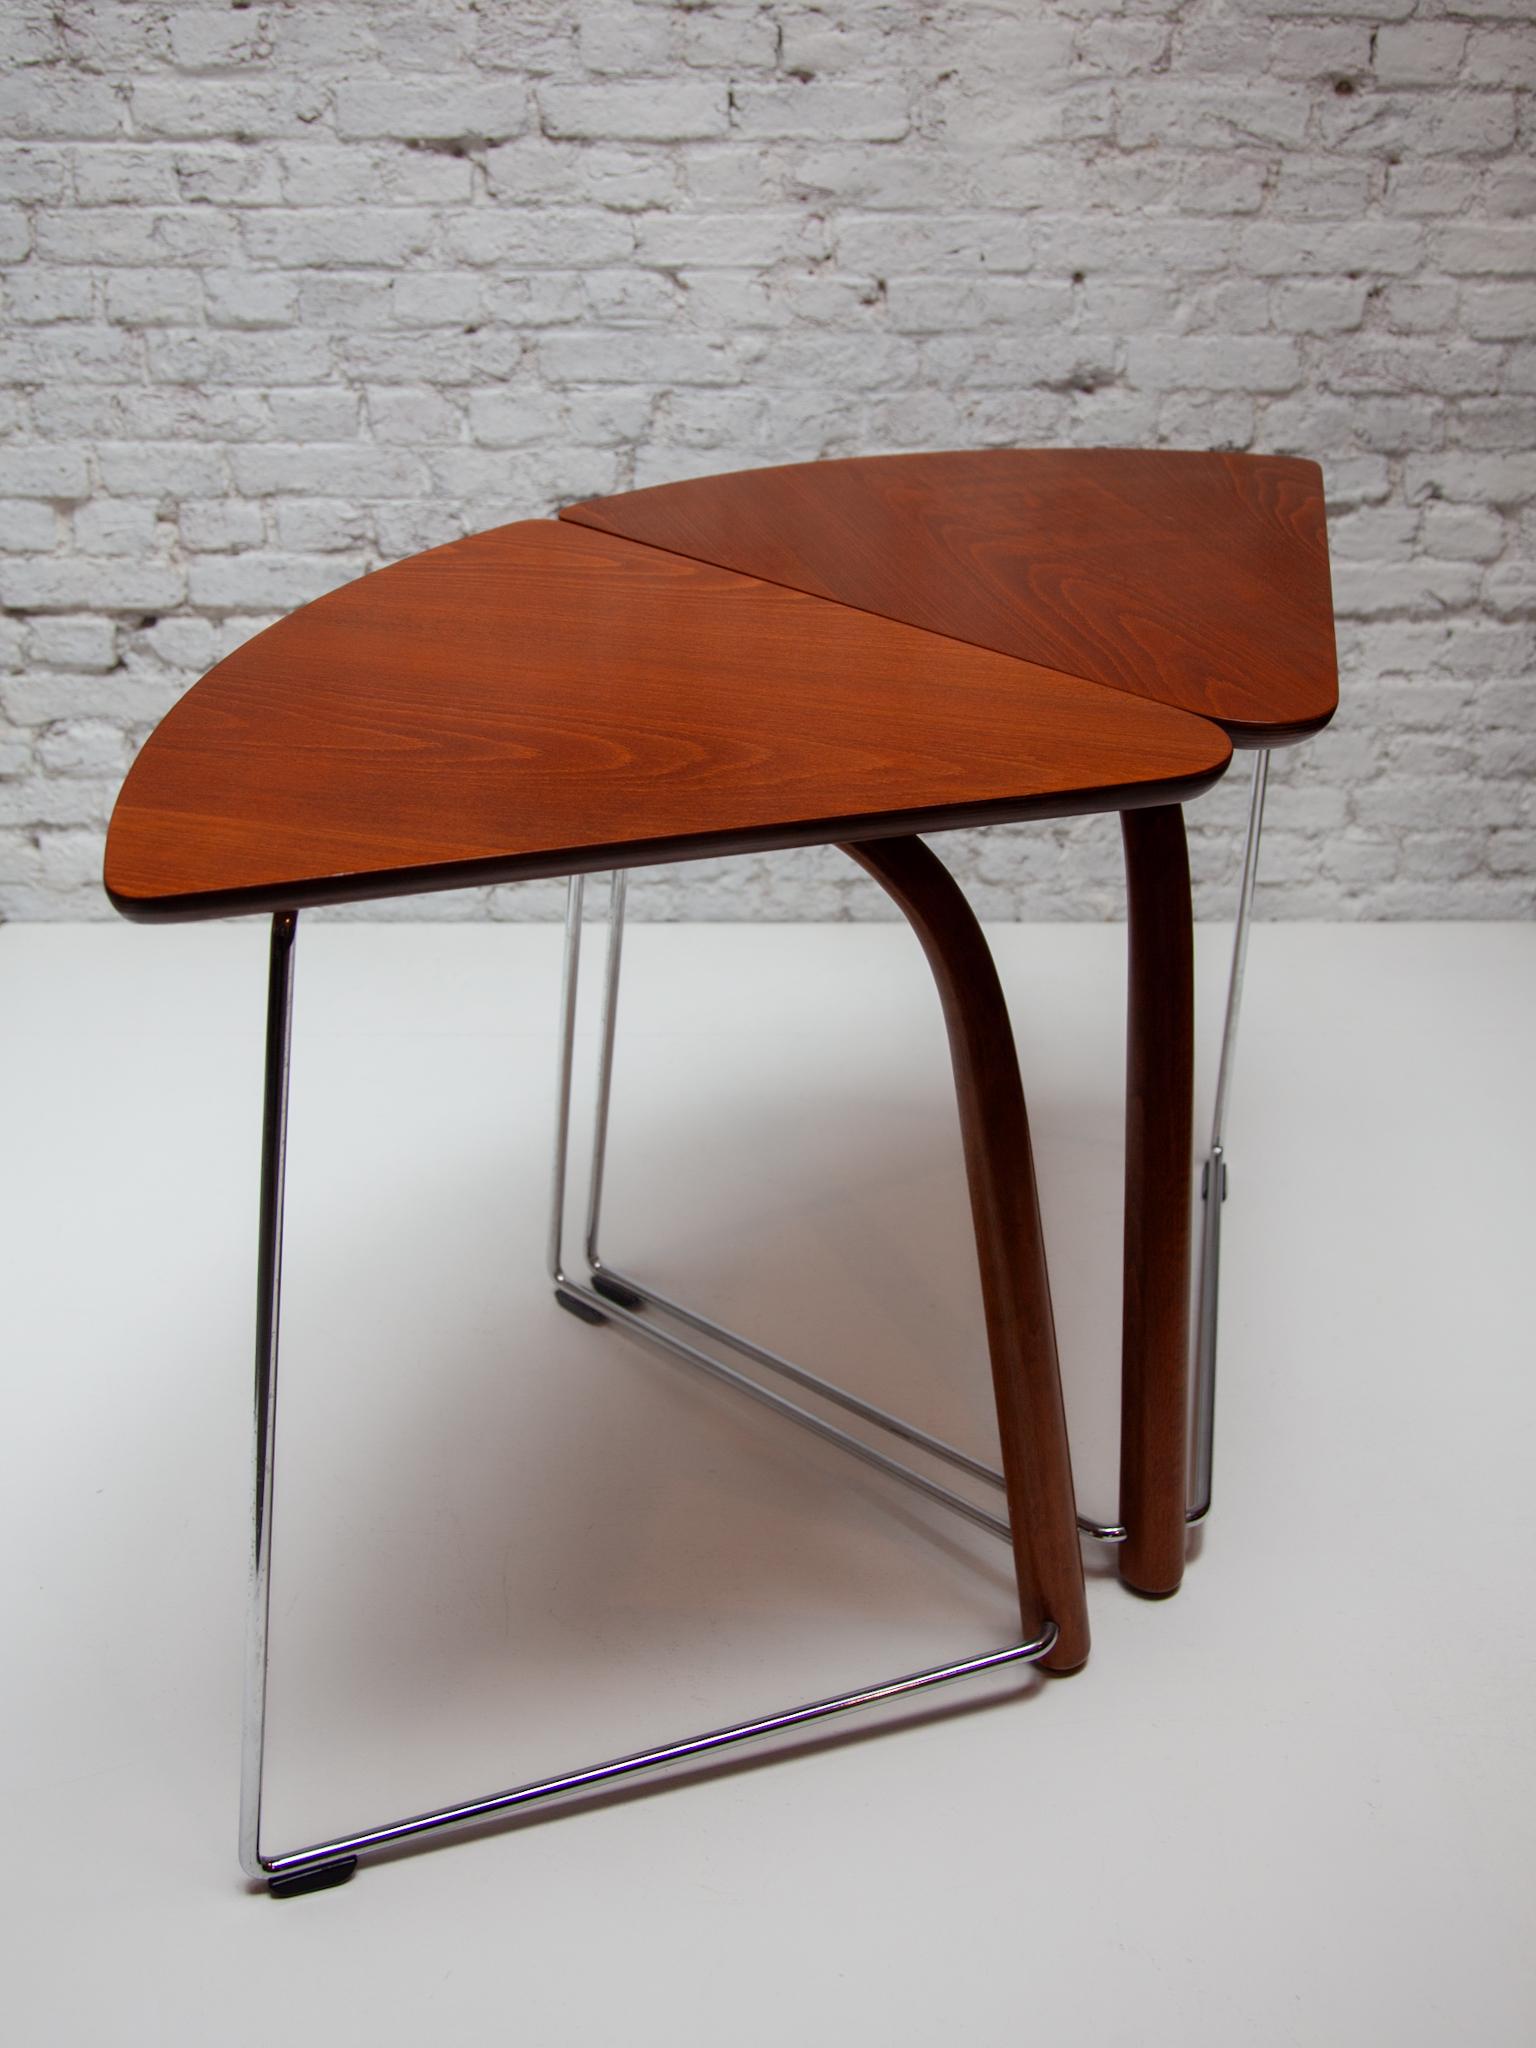 Set of Two Side Tables designed by Wulf Schneider and Ulrich Böhm, Thonet, 1980s For Sale 2